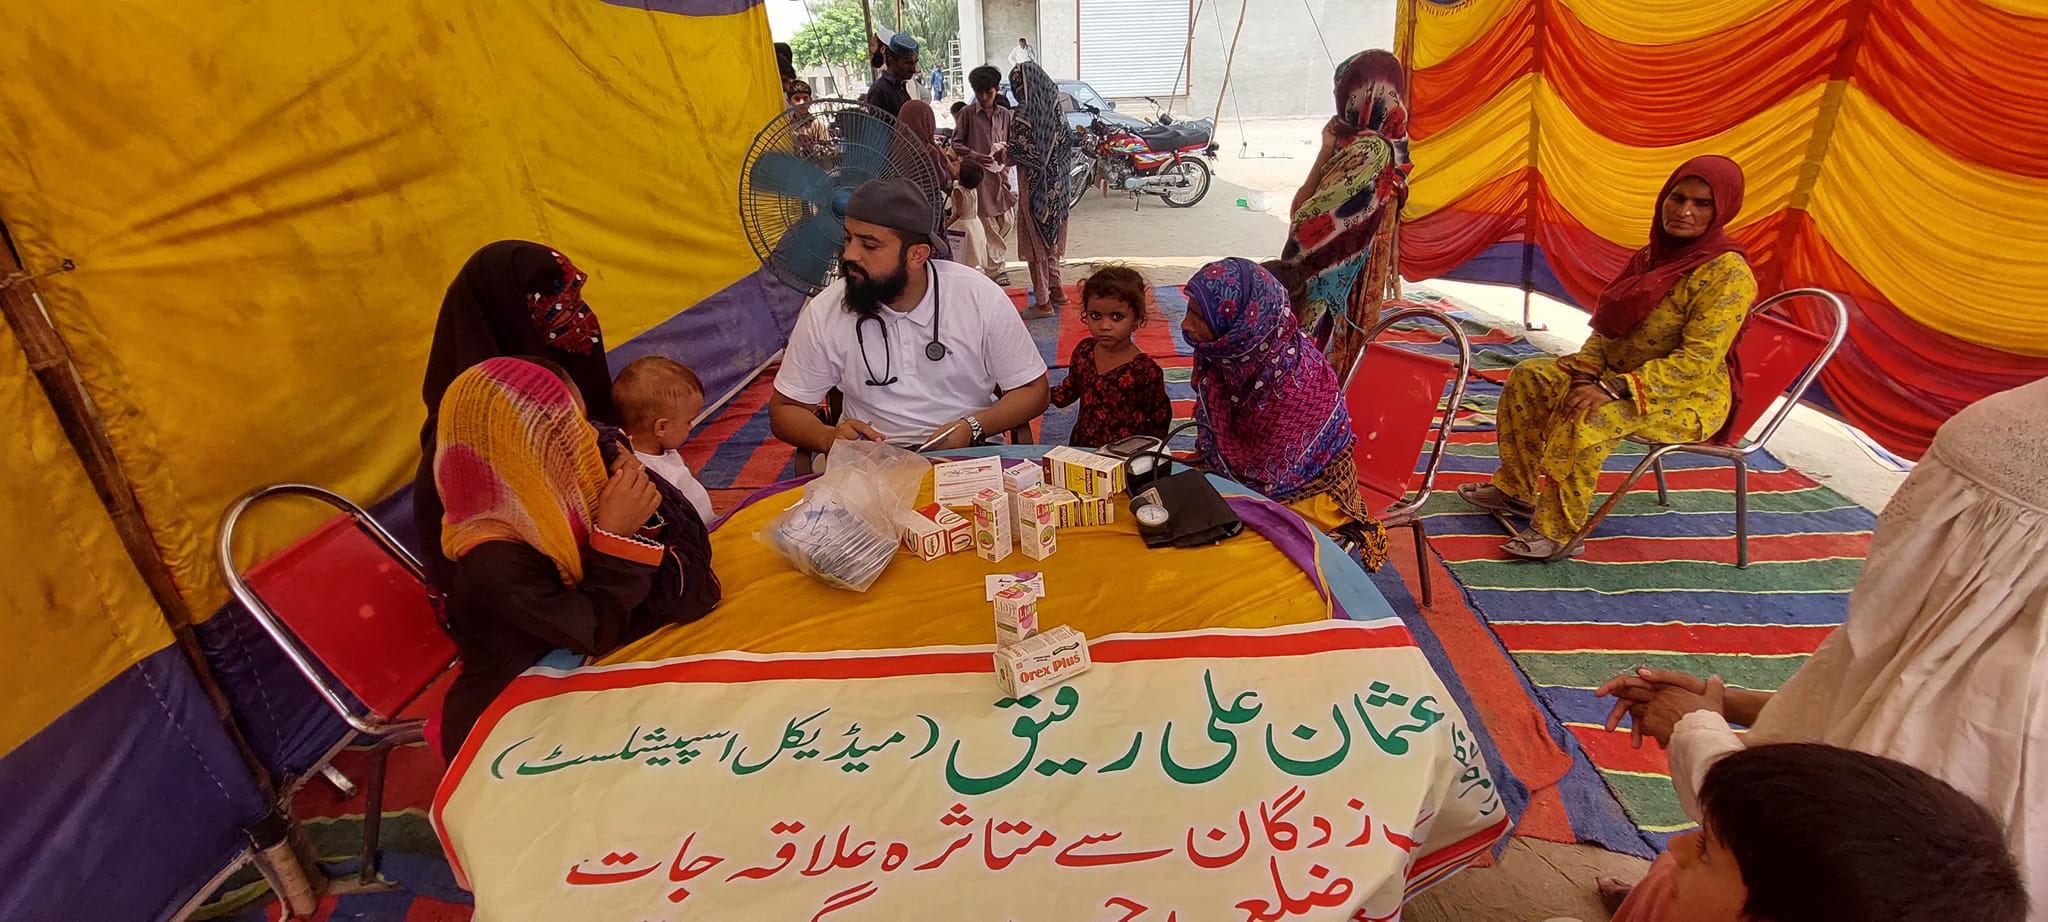 More than 500 Patients were provided free consultation and medicine